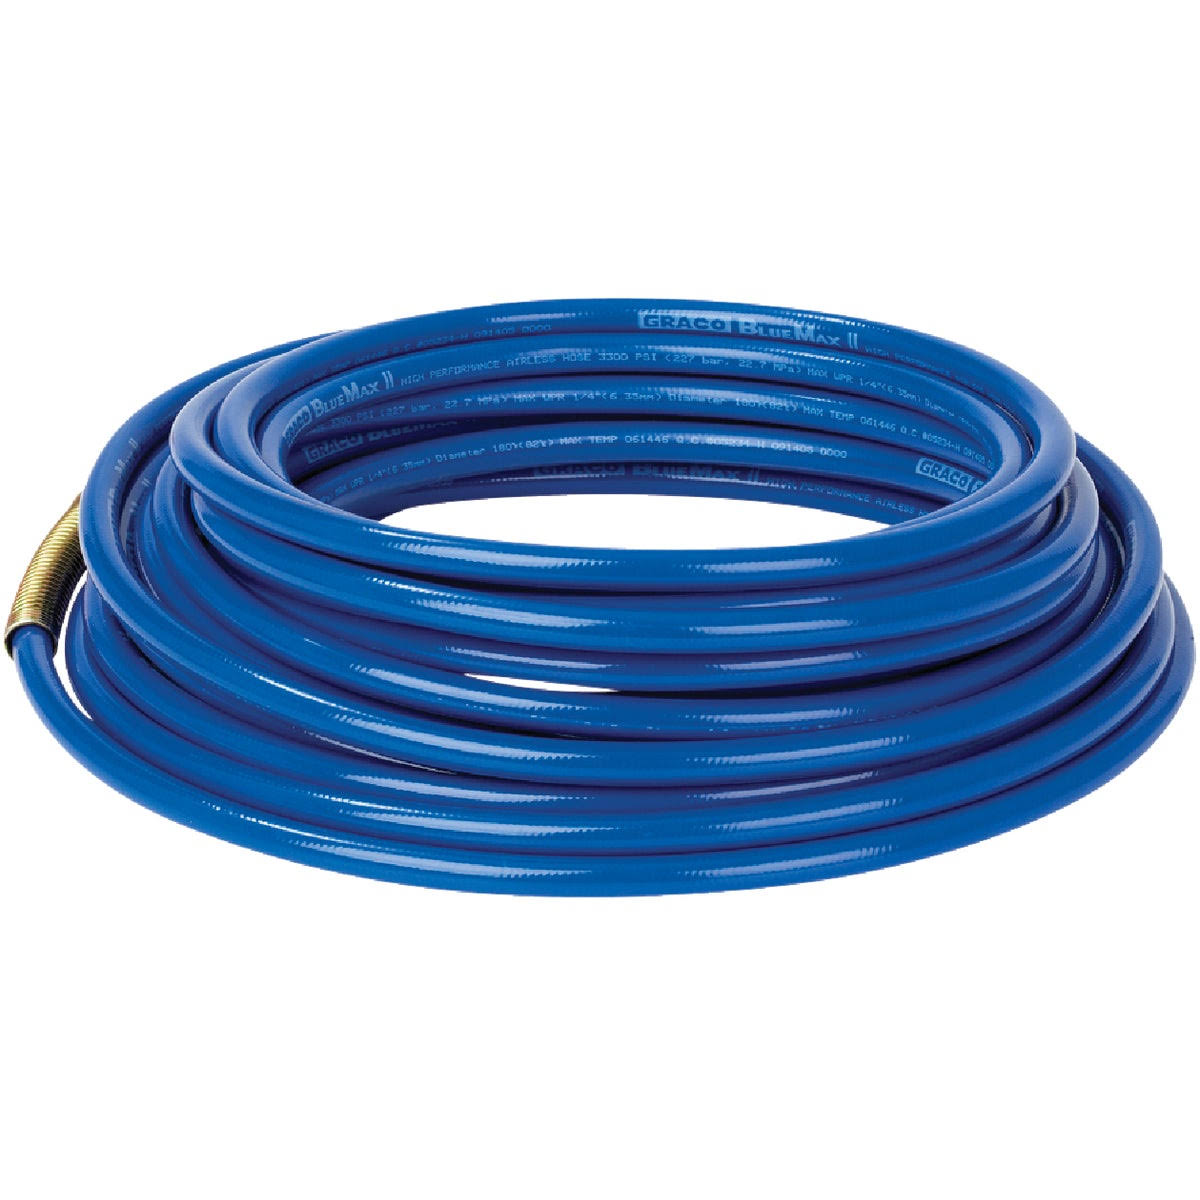 Graco 240794 BlueMax II Hose - For Airless Paint, Blue, ewe1/4"x50', 3300 PSI